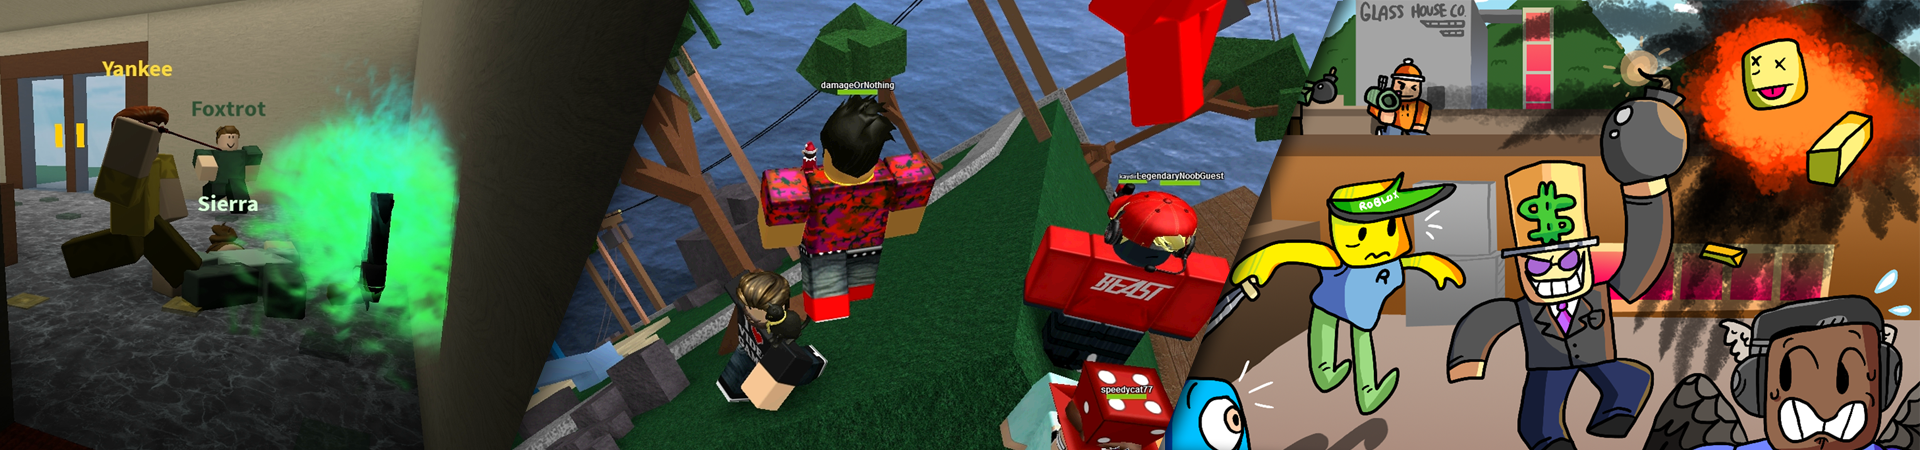 Admins Pick Their Favorite Games Of 2014 Part 2 Roblox Blog - roblox february 2014 gamescoops your games feed